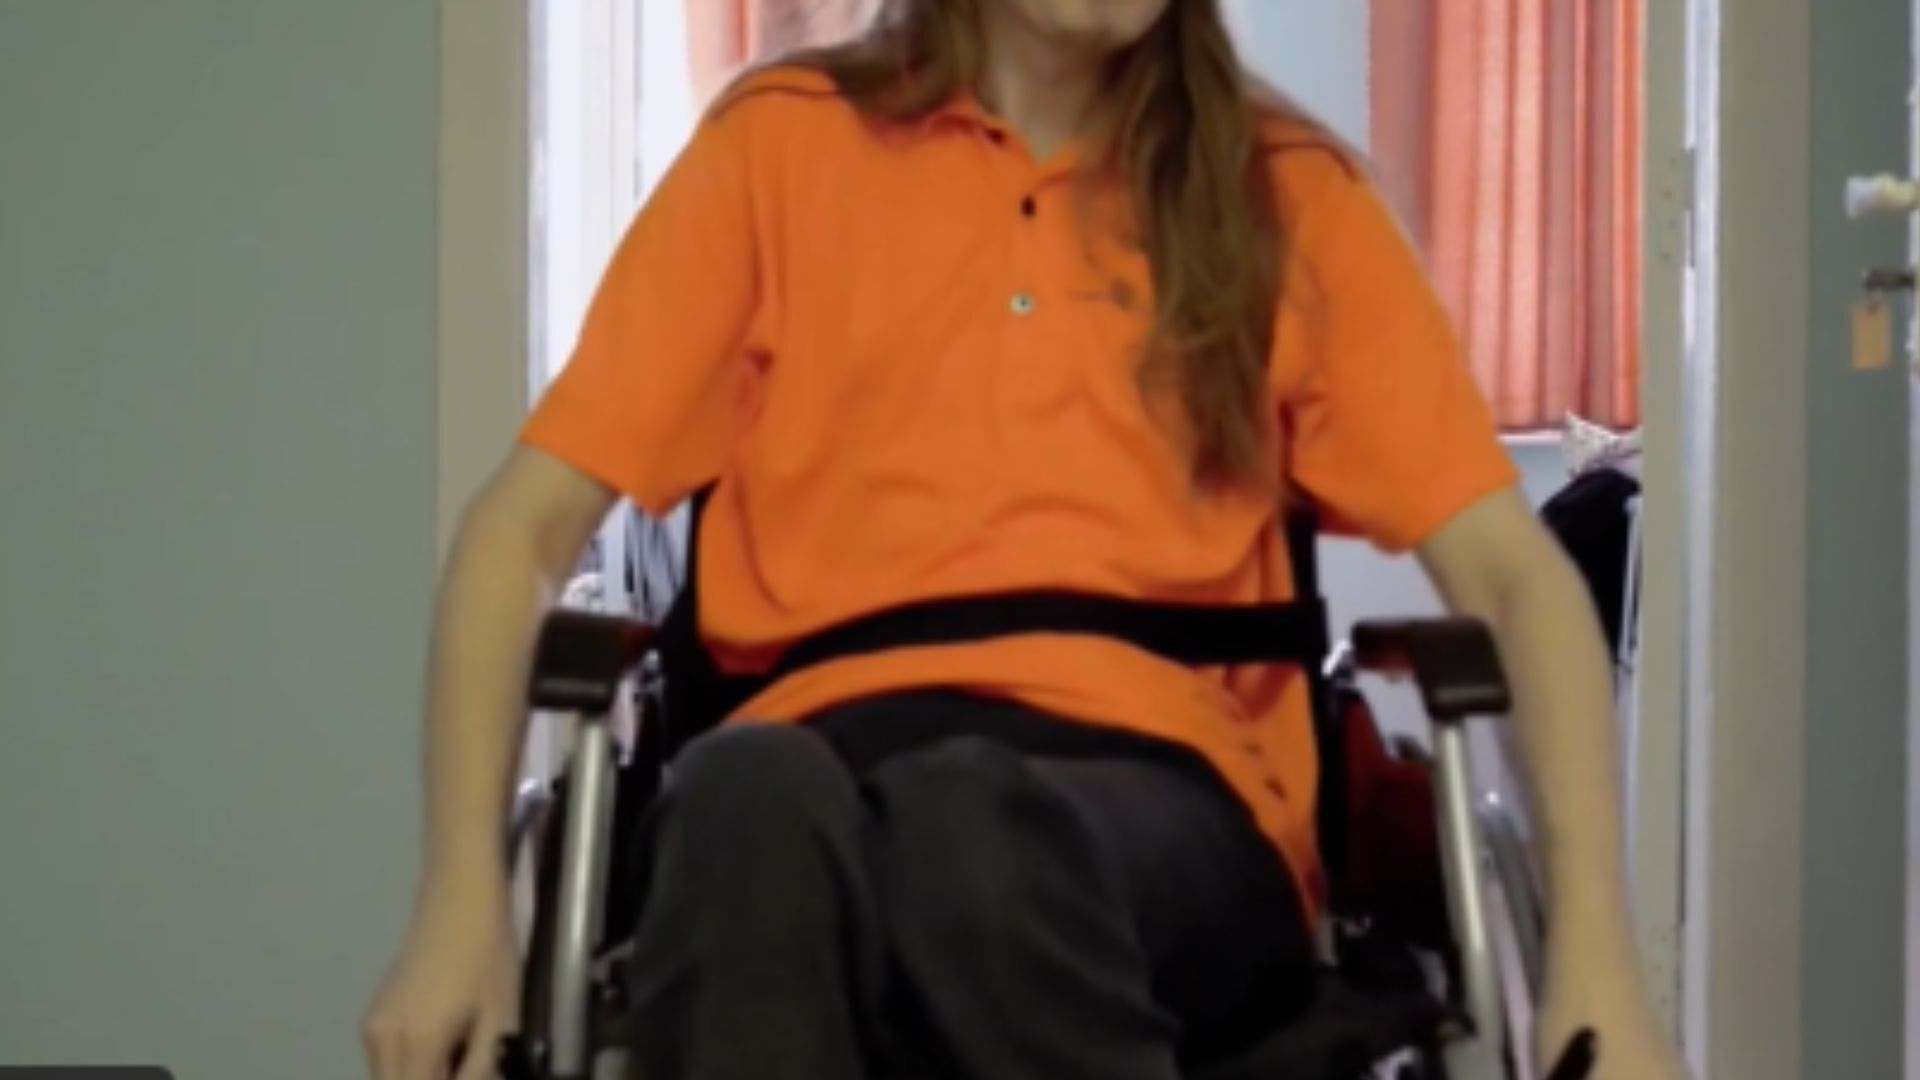 A patient with multiple sclerosis, more commonly known as MS. /Storyblocks